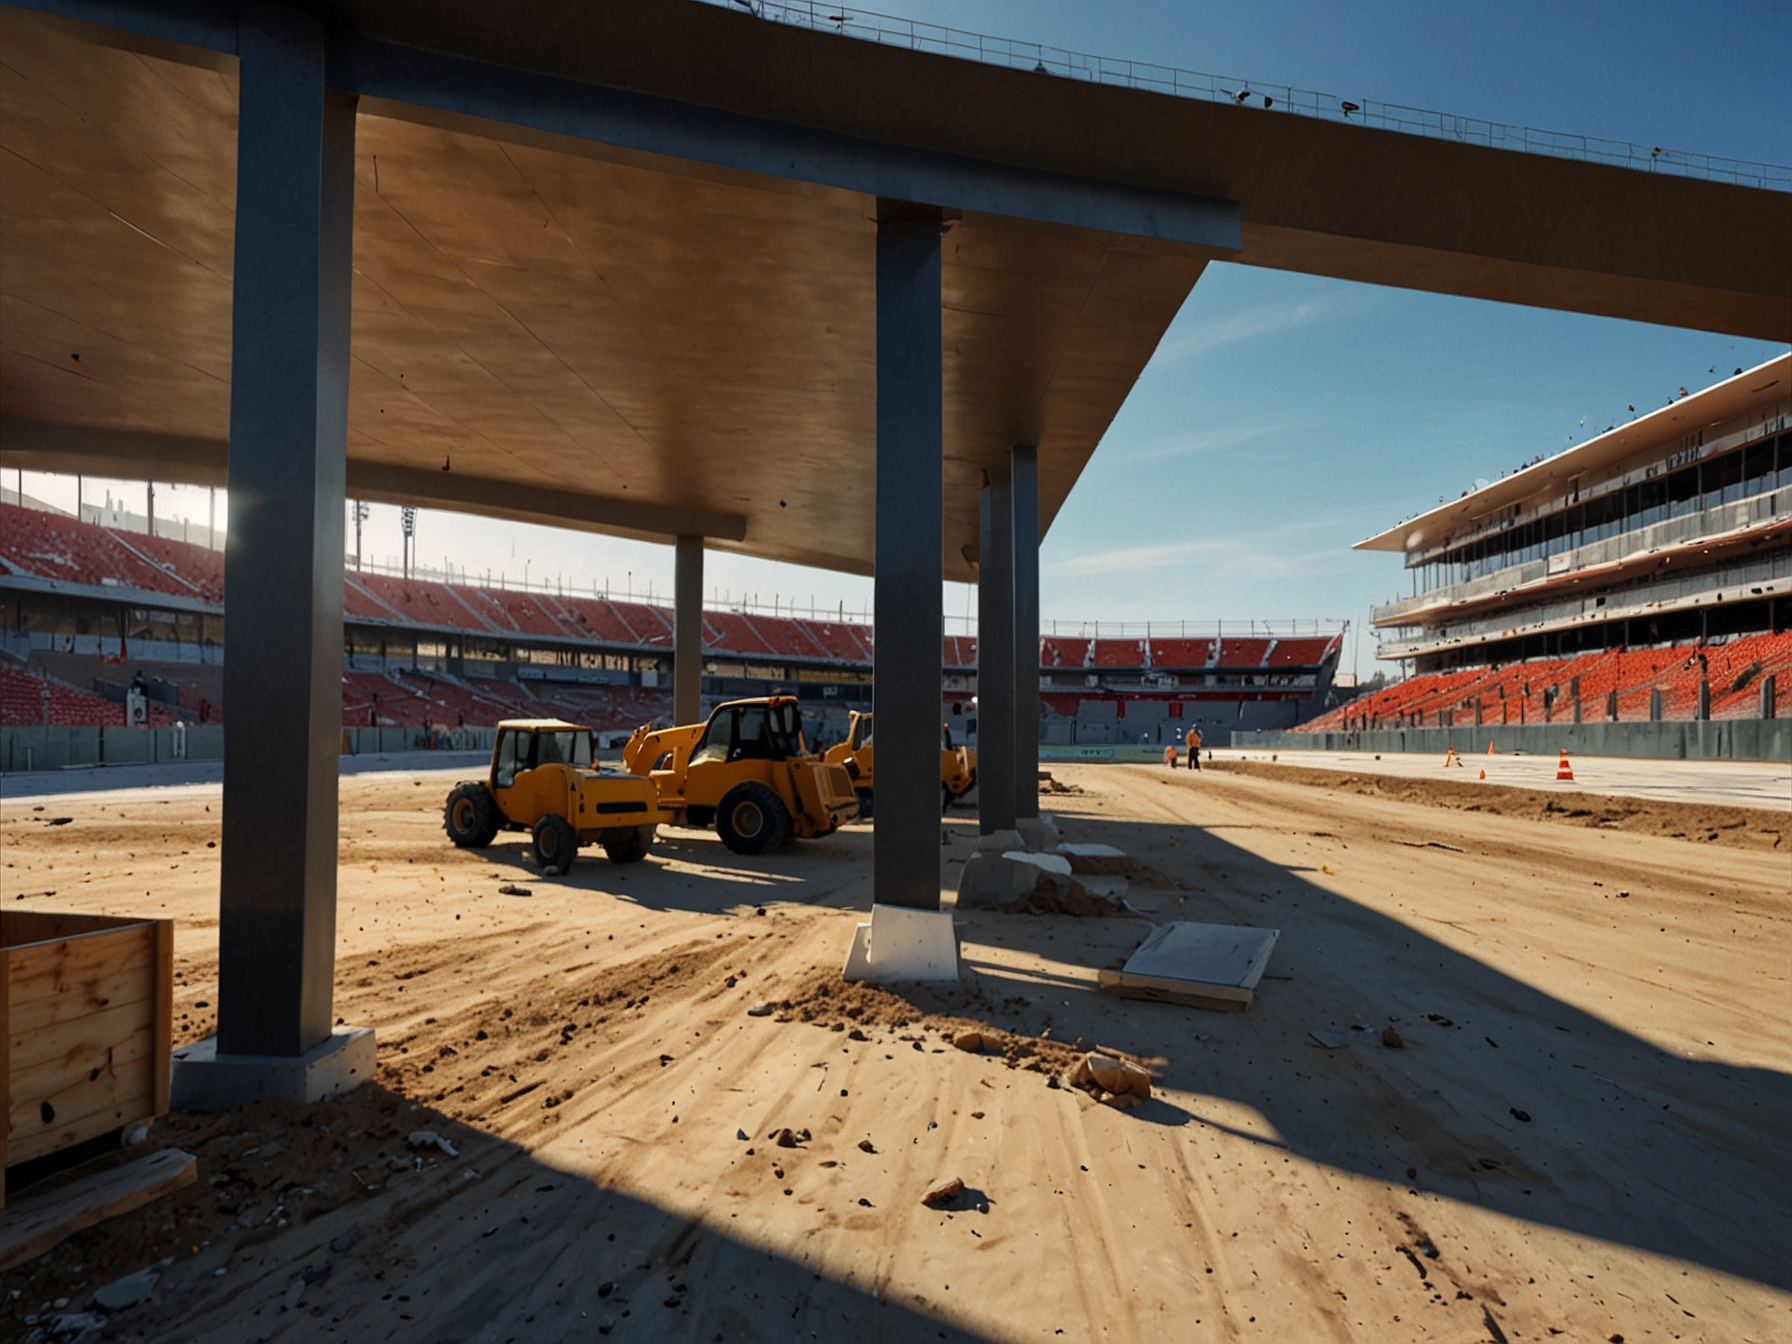 Paddock area and seating being renovated at the Circuit de Barcelona-Catalunya, with construction workers visible, highlighting ongoing efforts to modernize the facilities for better fan experience.